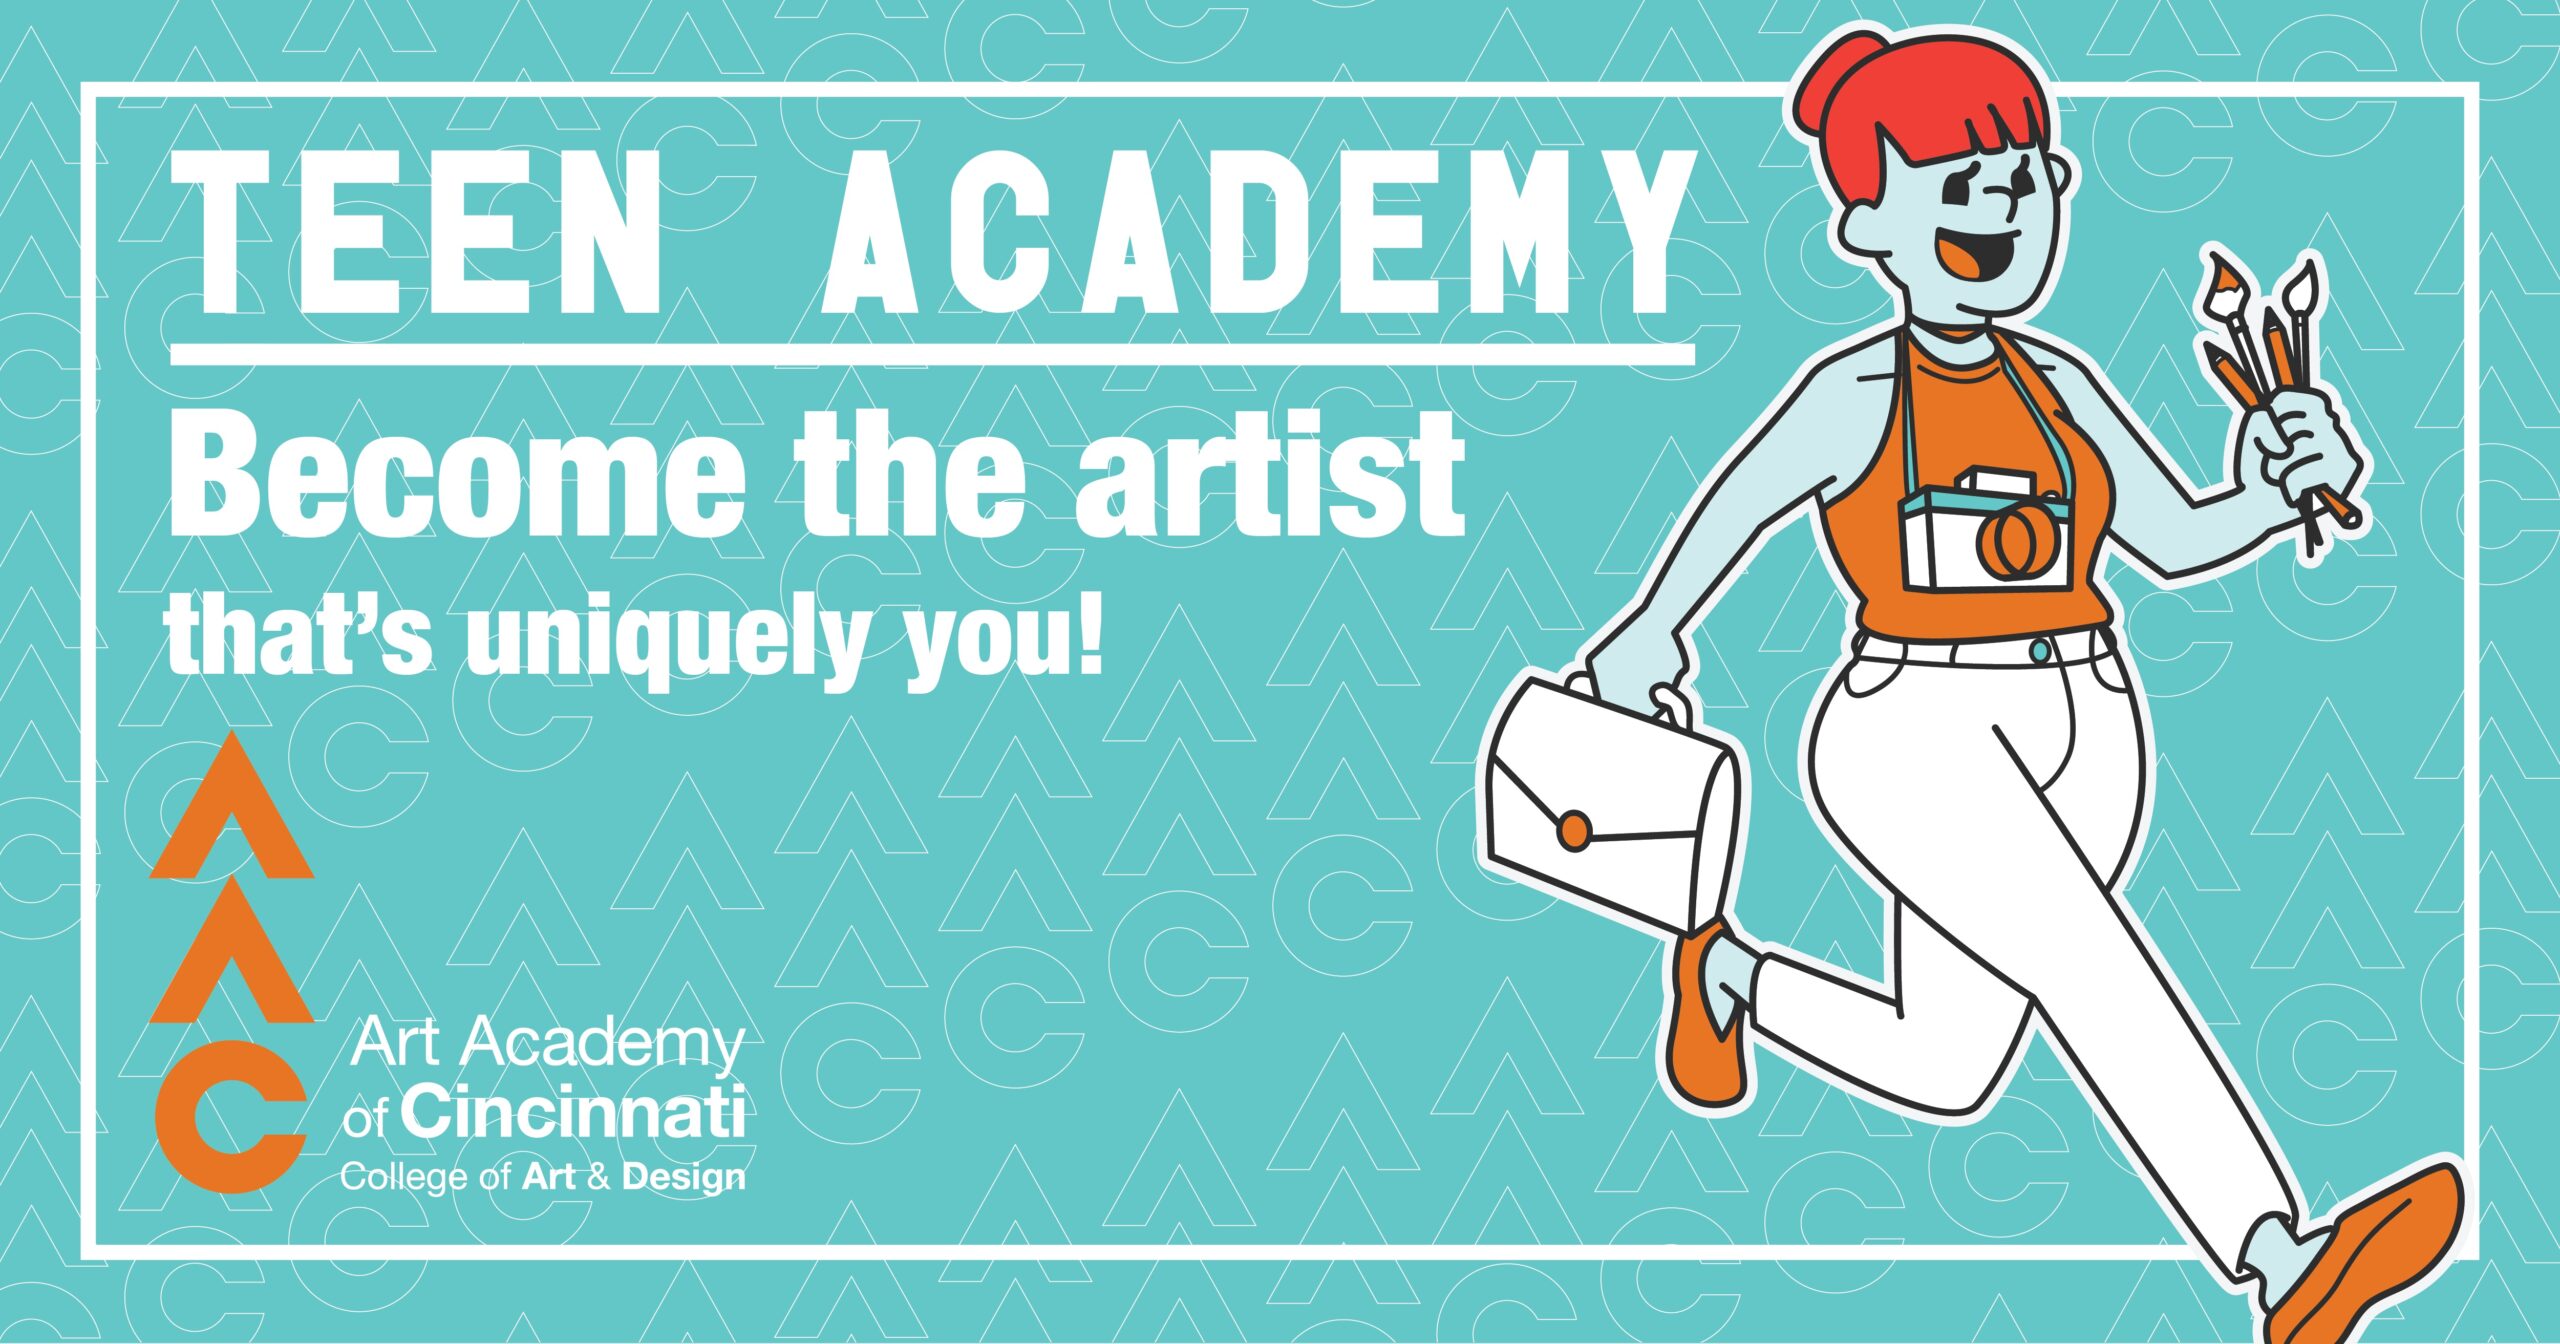 graphic of kids with brushes saying teen academy become the artist that's uniquely you!